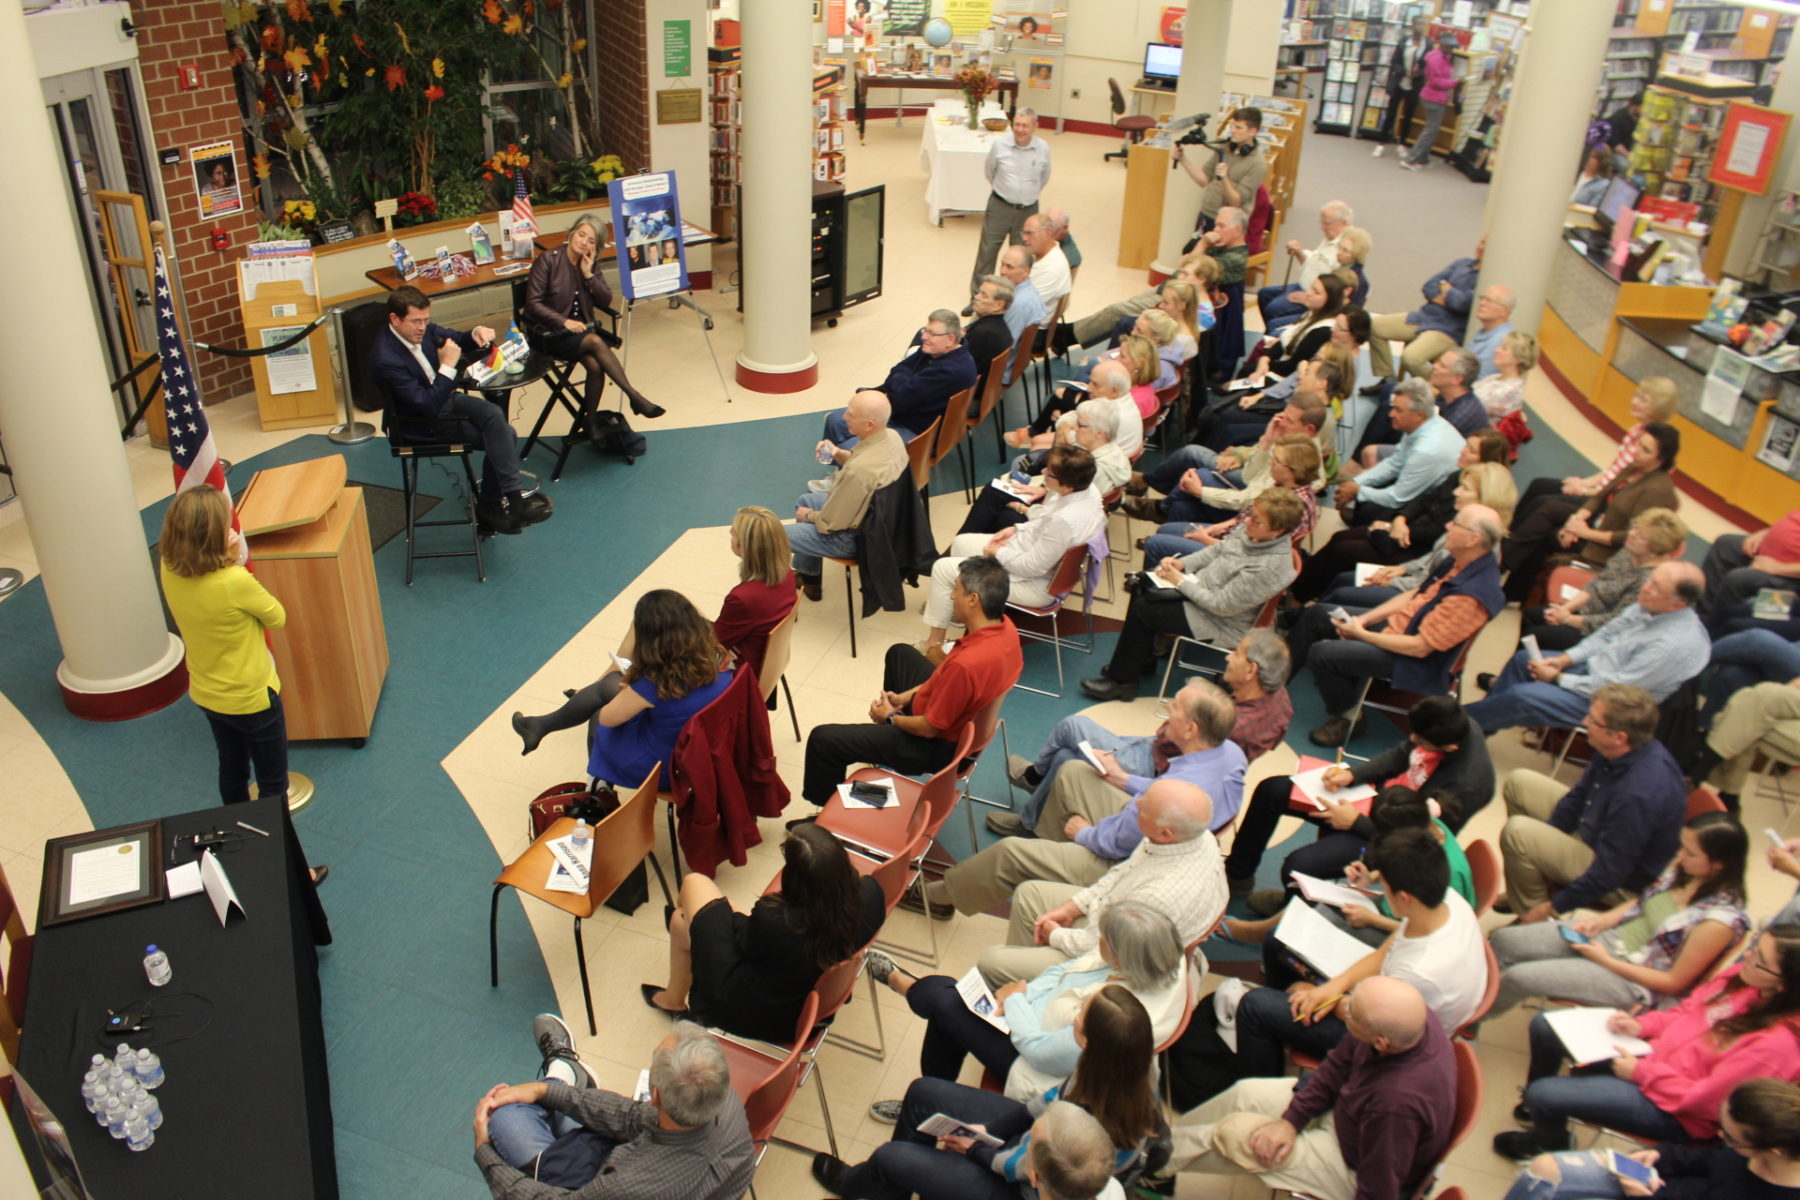 October 19- Julianne Smith, Karl Theodor zu Guttenberg, and Ambassador Karin Olofsdotter speak to a crowd of over 100 at the Peters Township Public Library. 